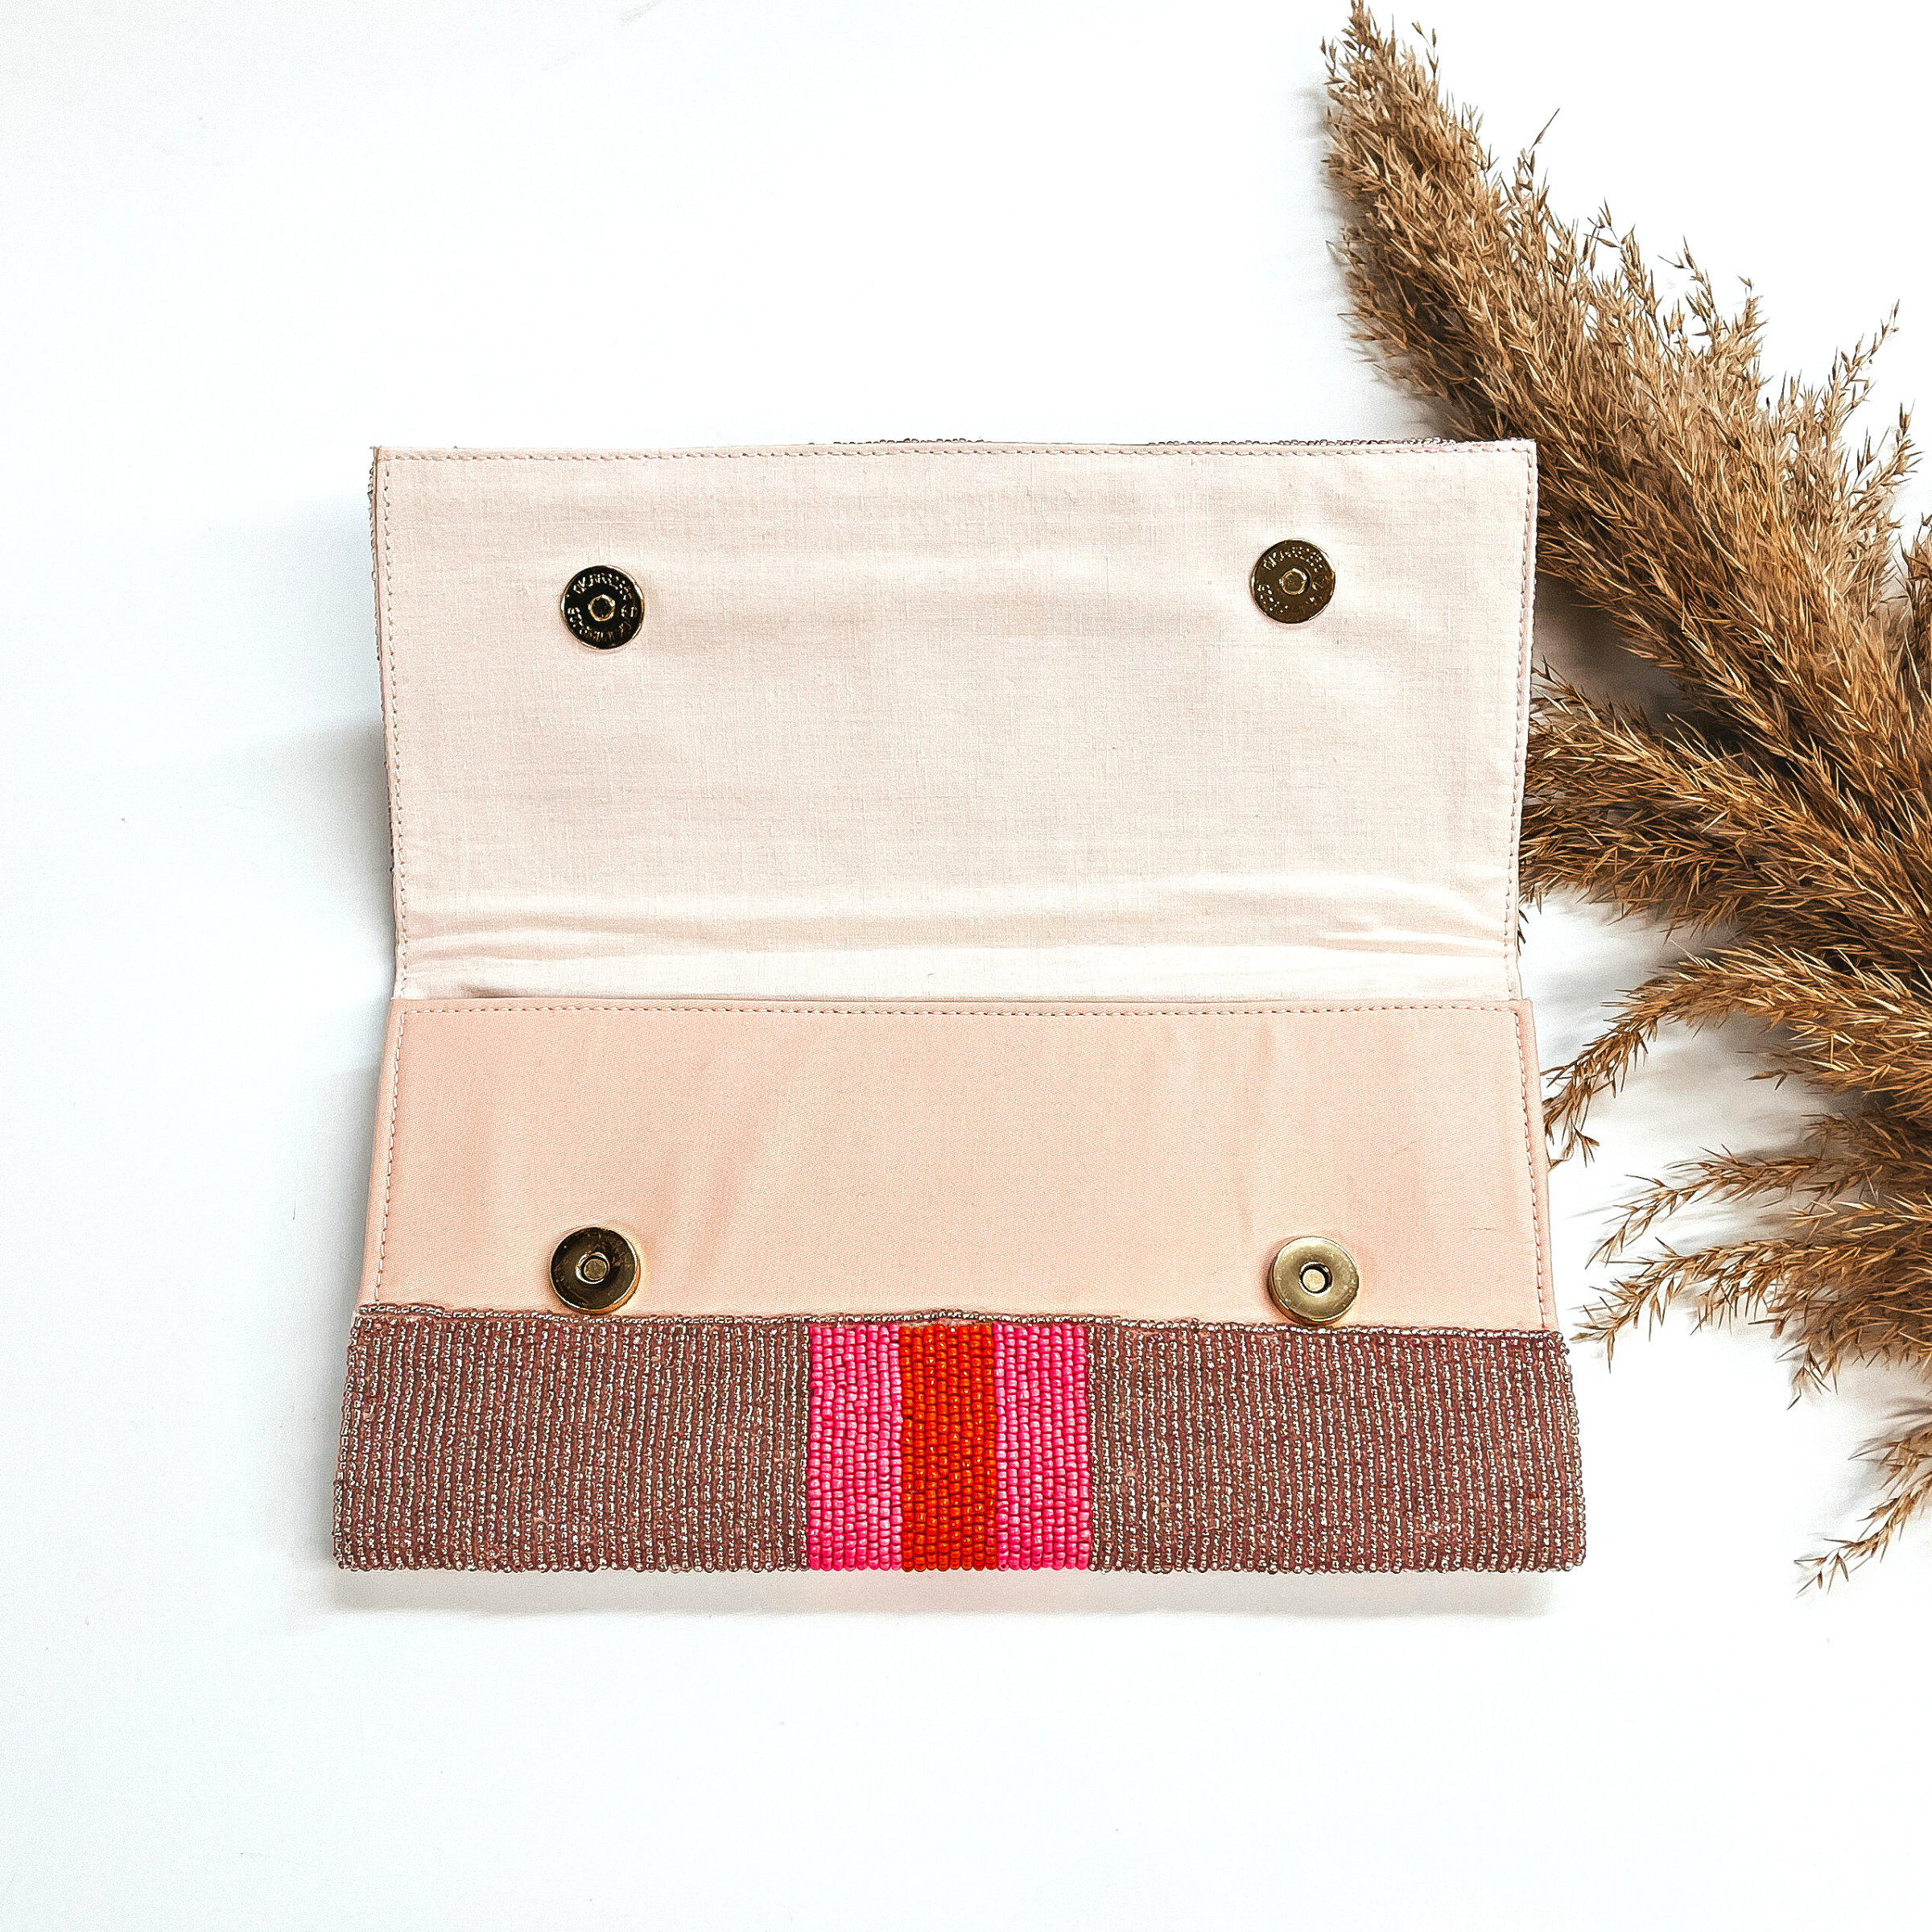 This is the inside of the seedbeaded clutch purse in rose gold with  three stripes in the middle, two hot pink and one orange line in the middle. This bag  is taken laying on a white background with a brown plant in the side as decor.